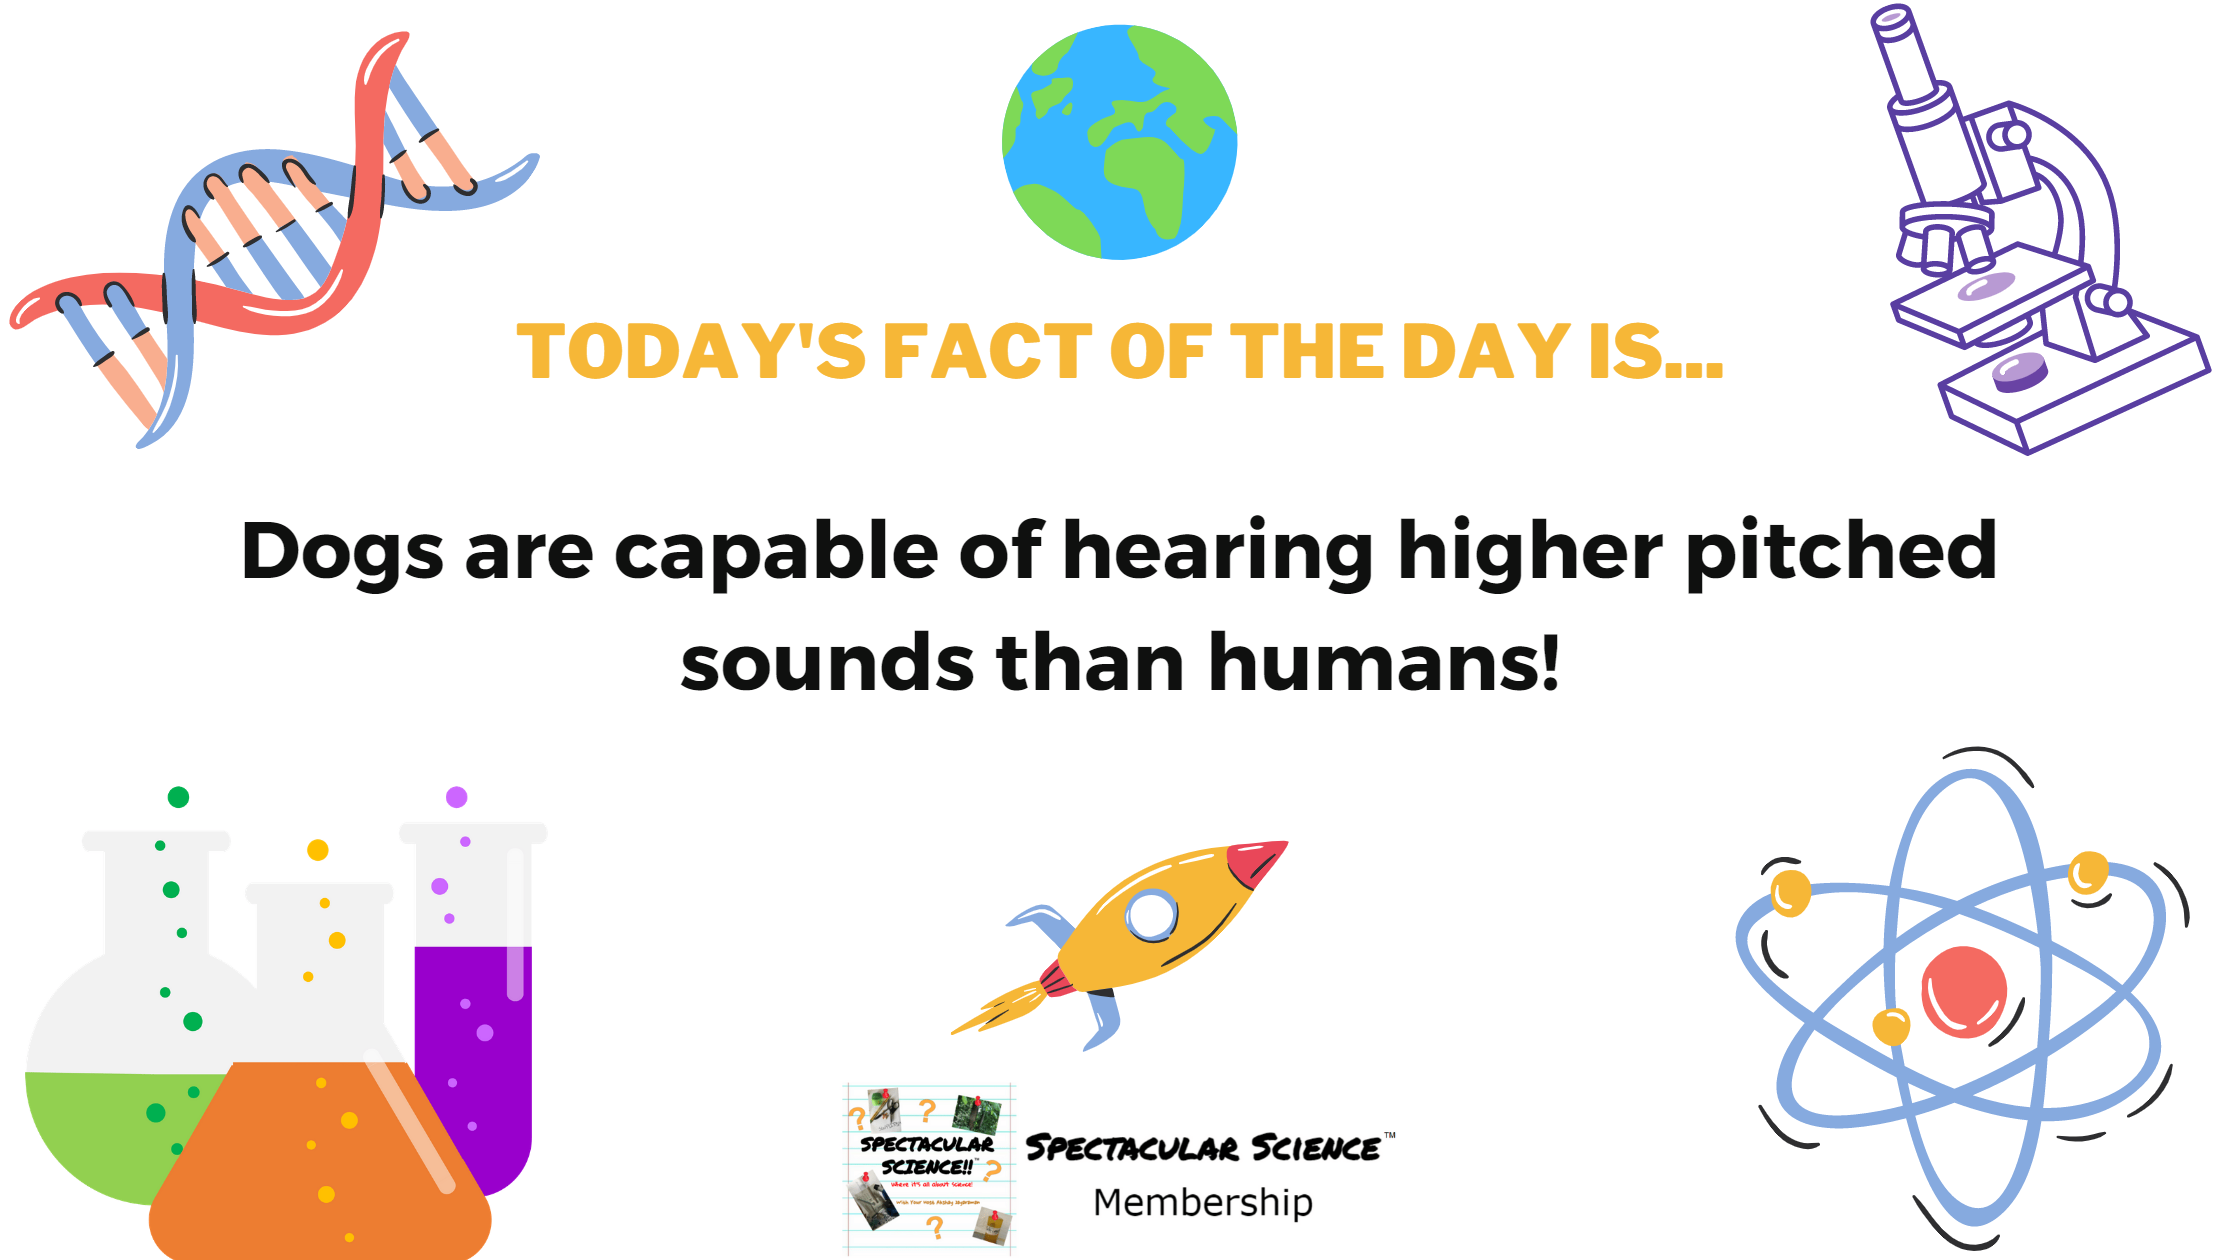 Fact of the Day Image December 9th